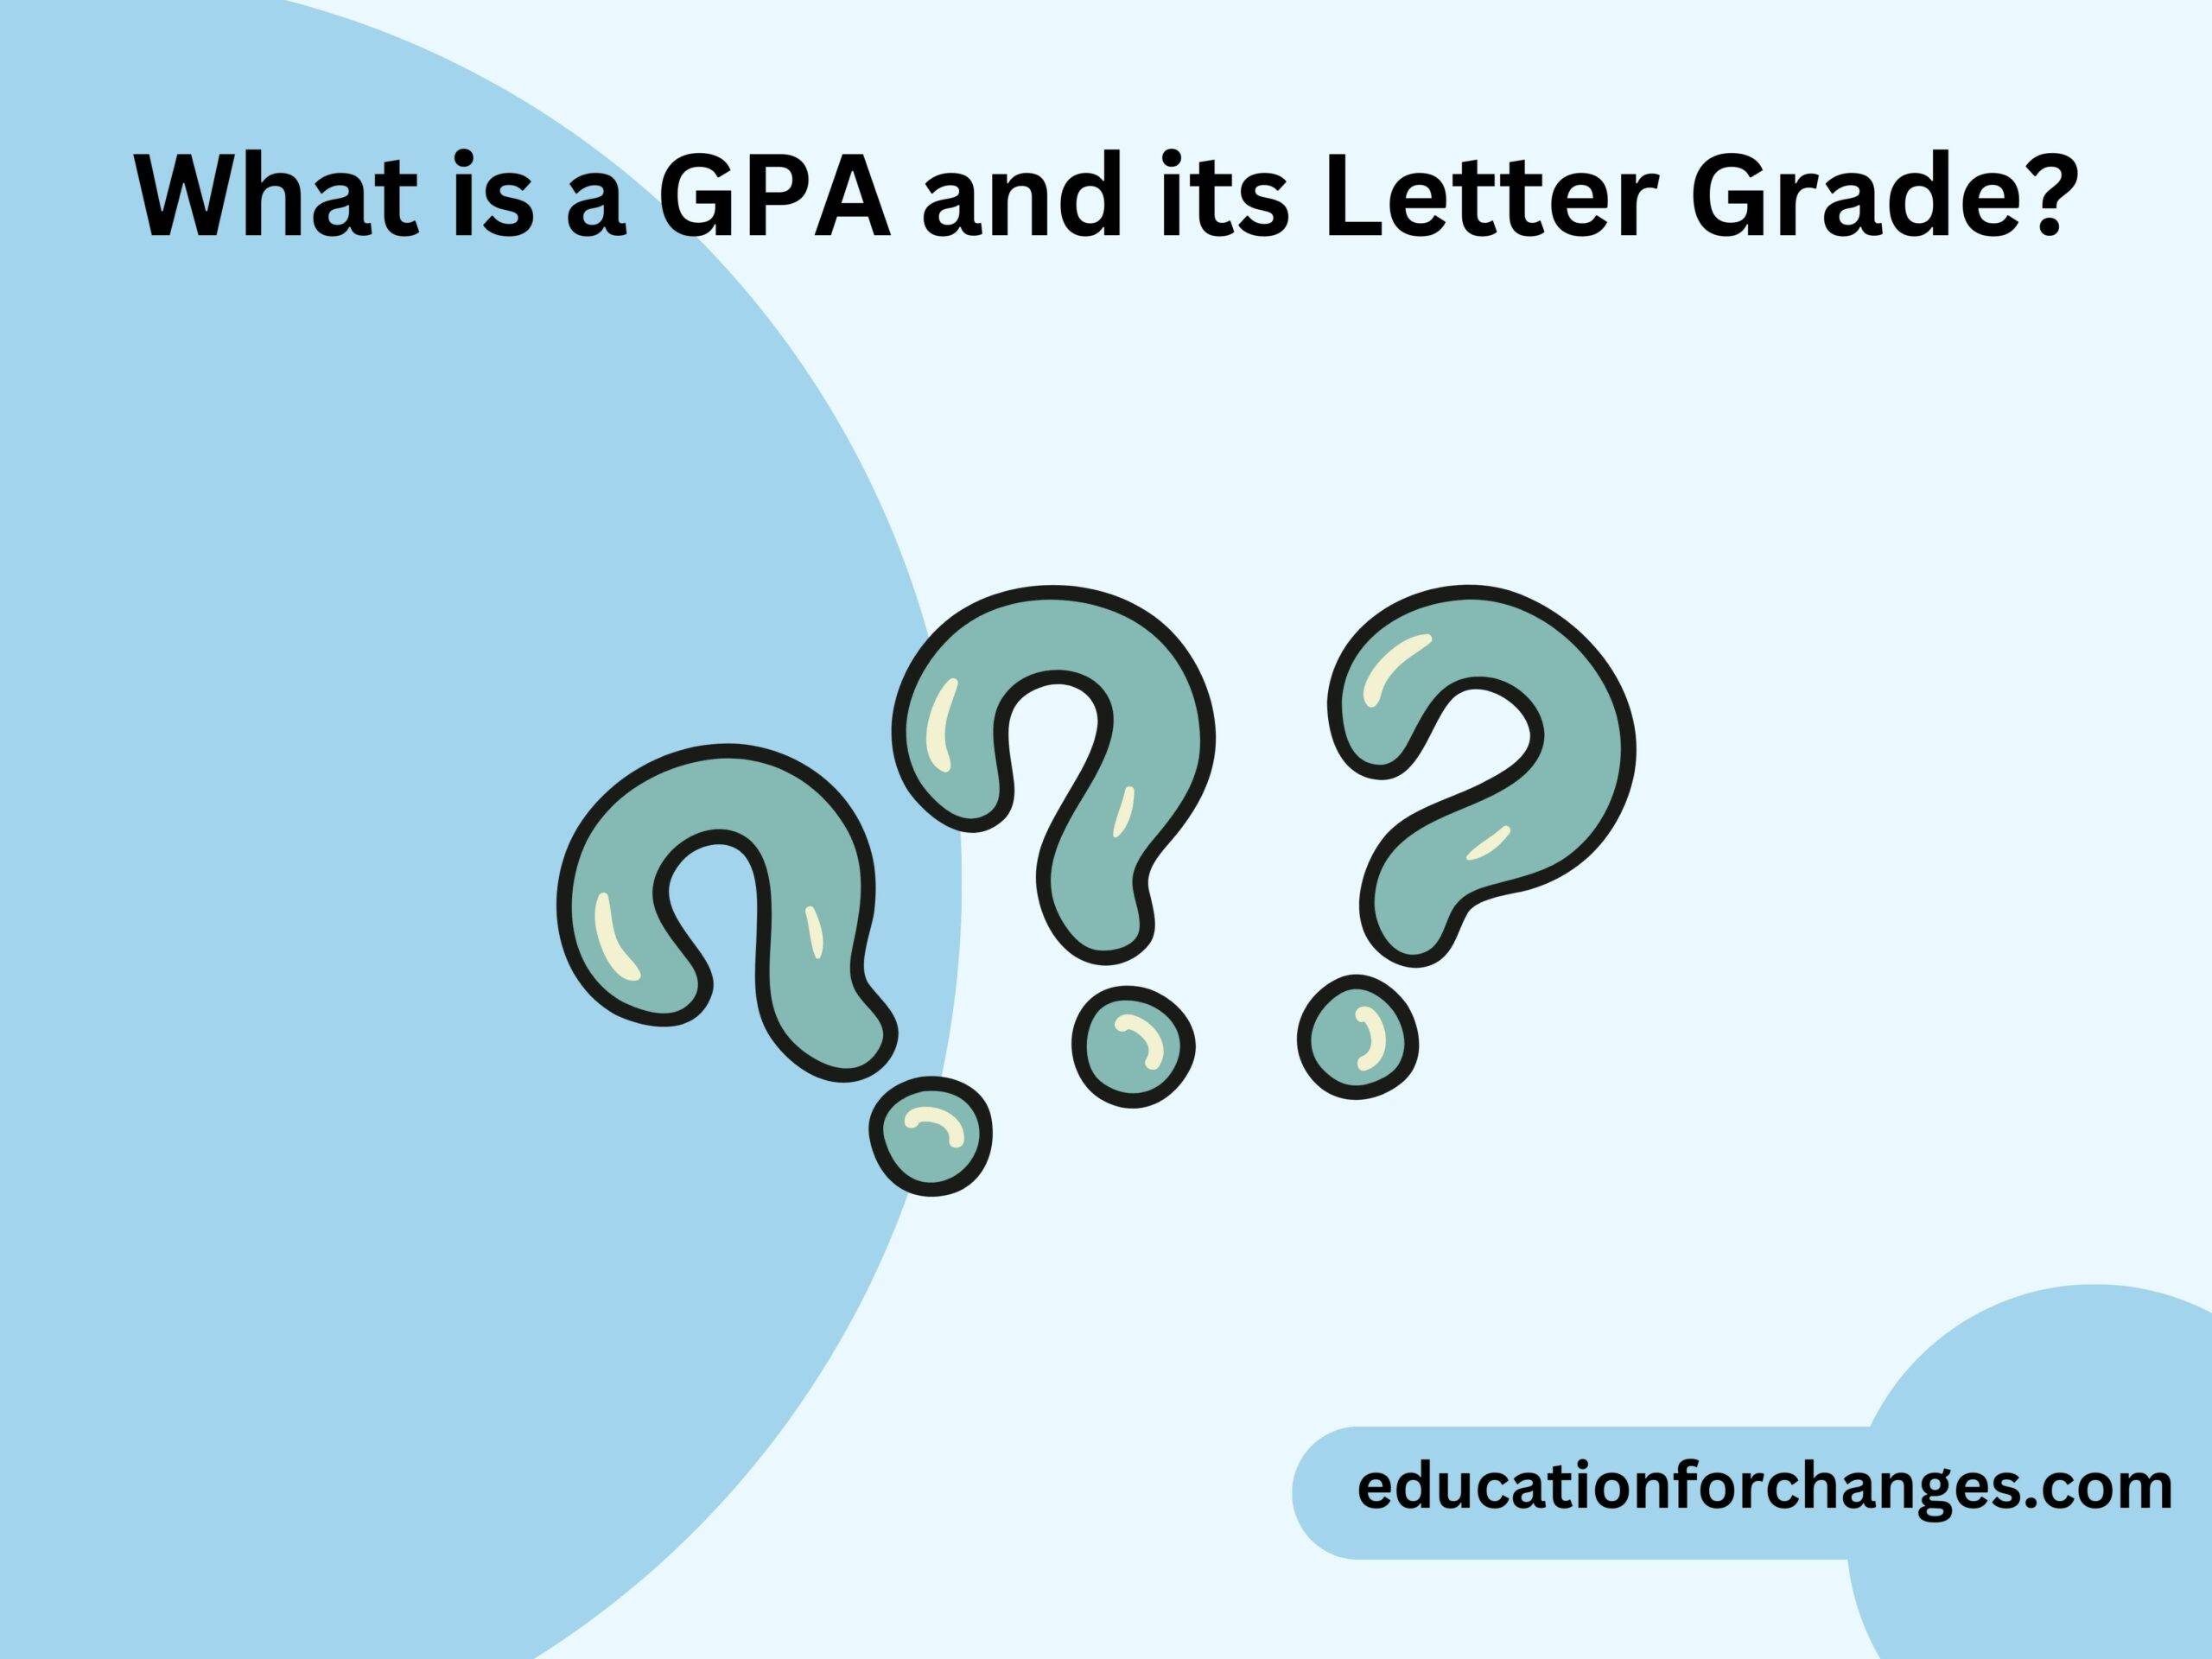 What is a GPA and its Letter Grade